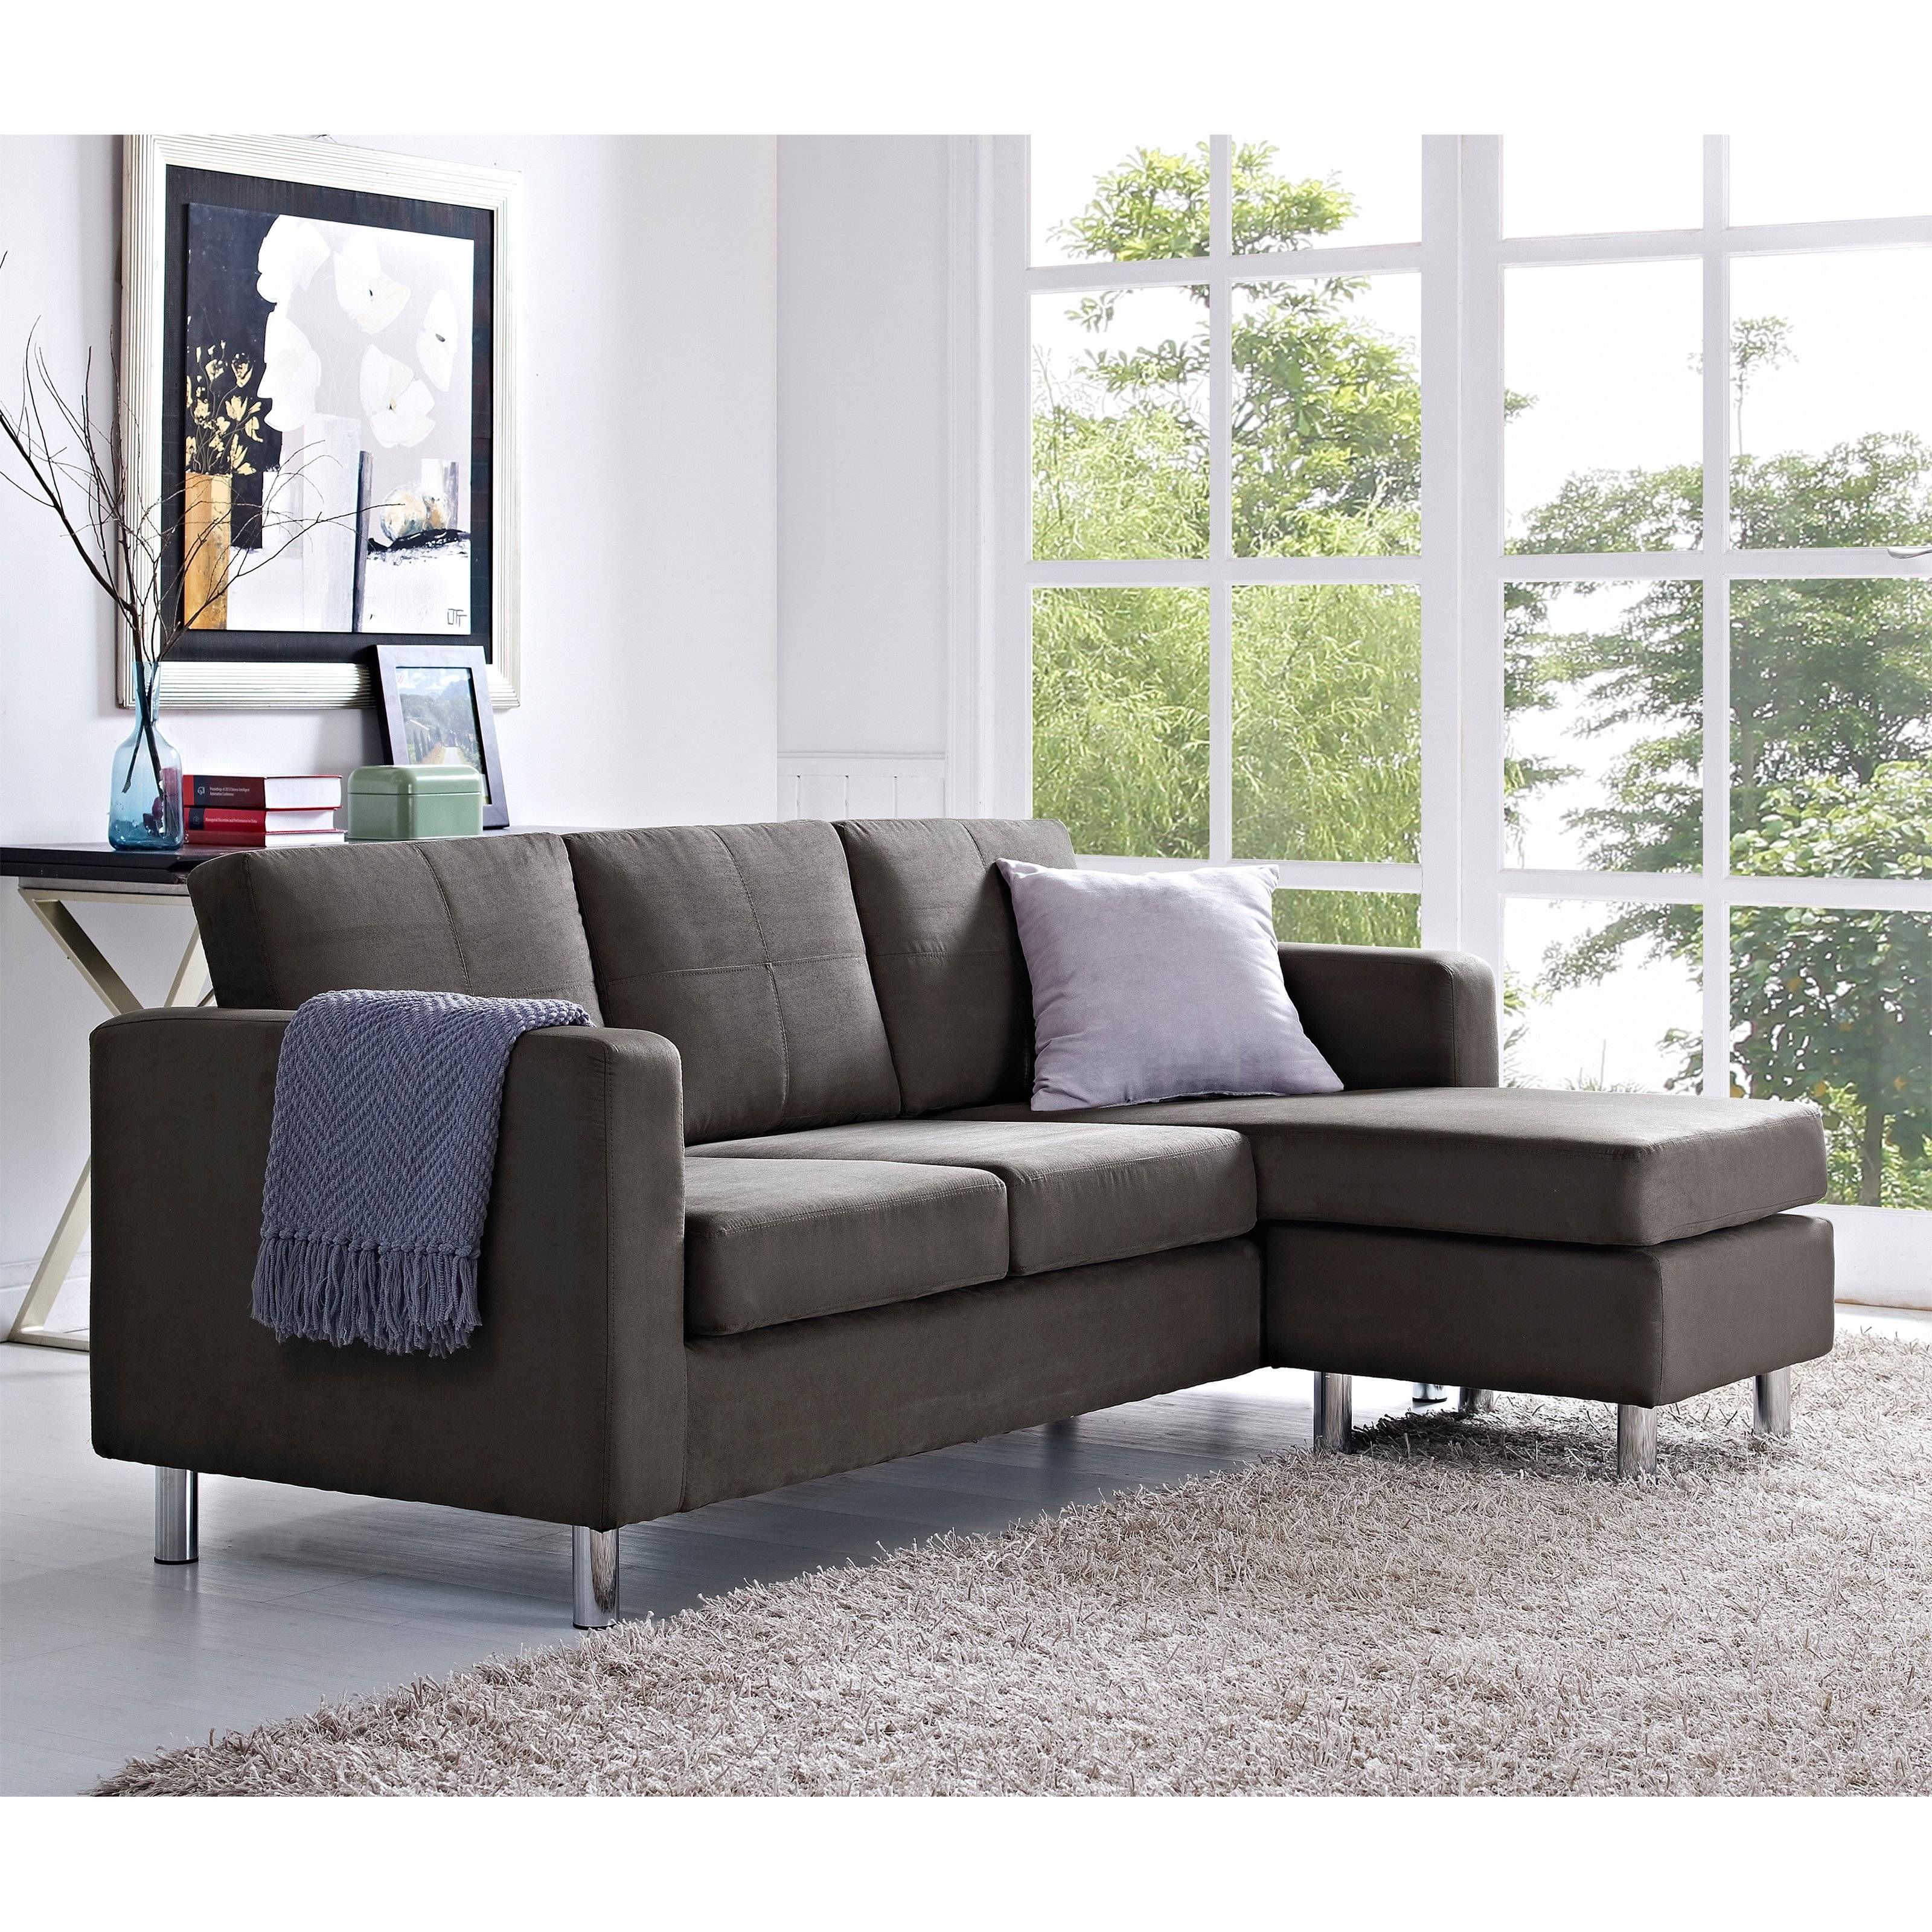 Dorel Living Small Spaces Configurable Sectional Sofa | Hayneedle Inside Small Sectional Sofas For Small Spaces (View 18 of 25)